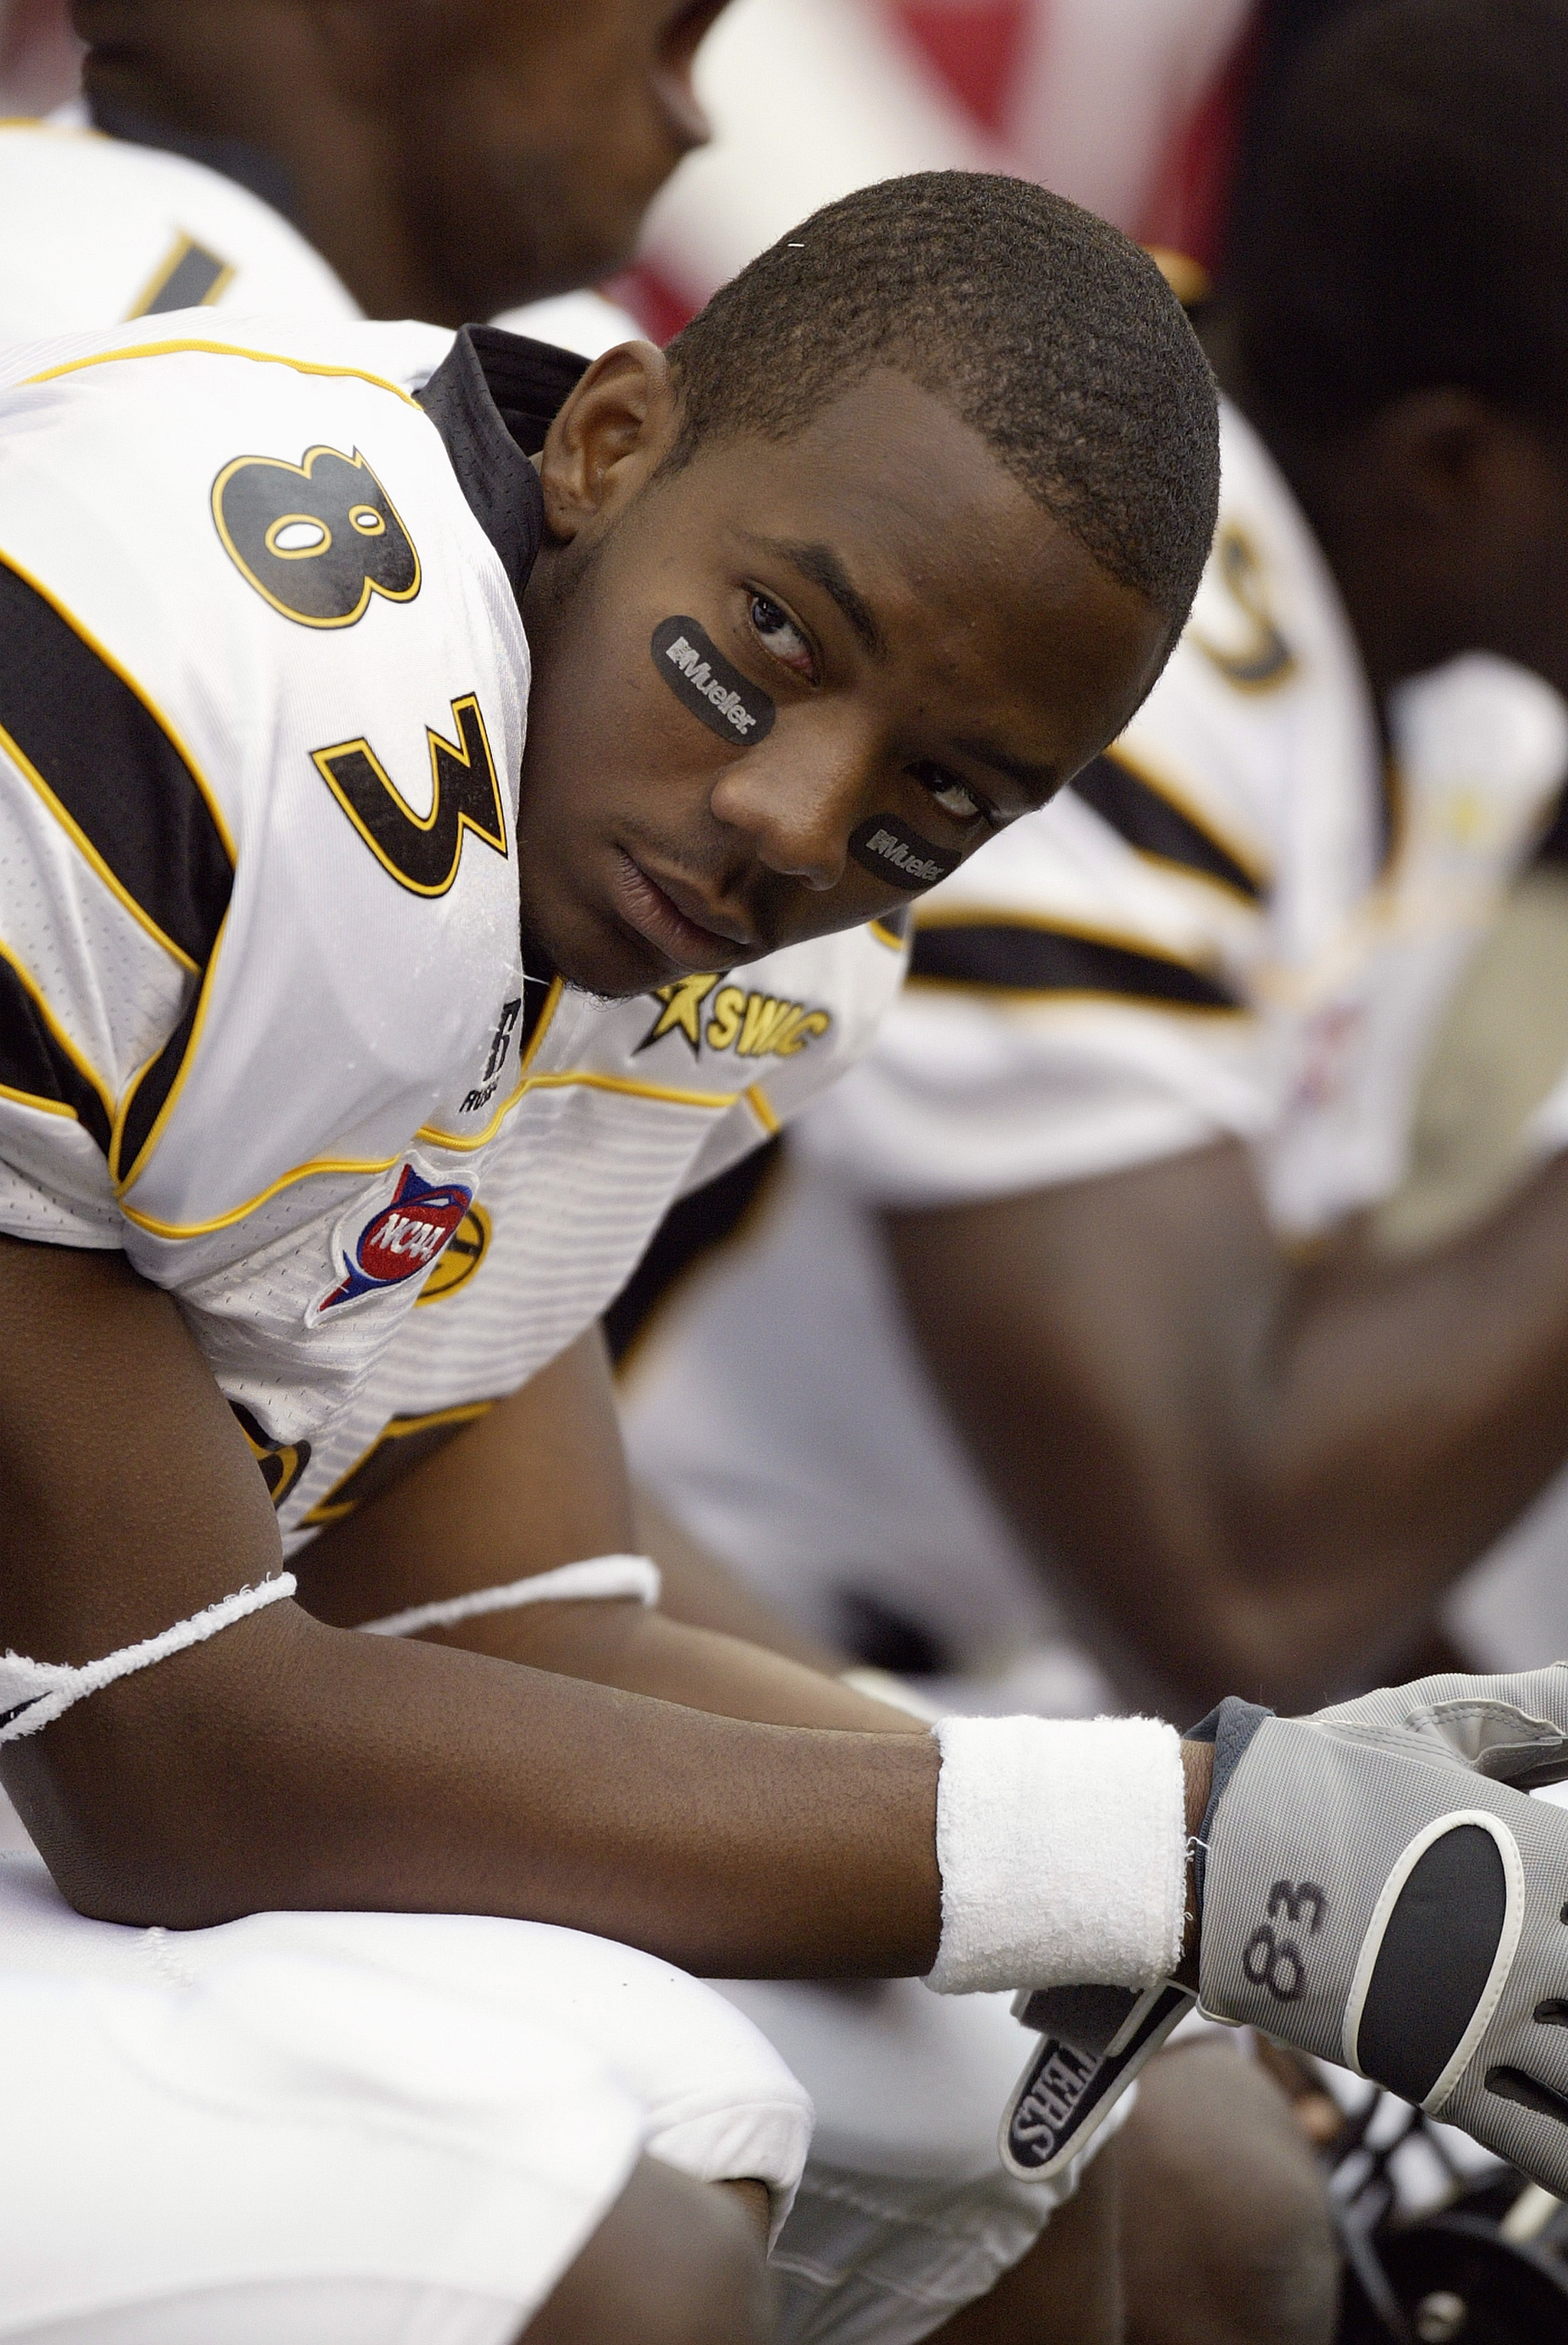 SEATTLE - SEPTEMBER 17:  Wide receiver Xavier Jackson #83 of the Grambling State University Tigers looks on as he sits on a sideline bench during a NCAA game against the Washington State University Cougars at Quest Field on September 17, 2005 in Seattle W